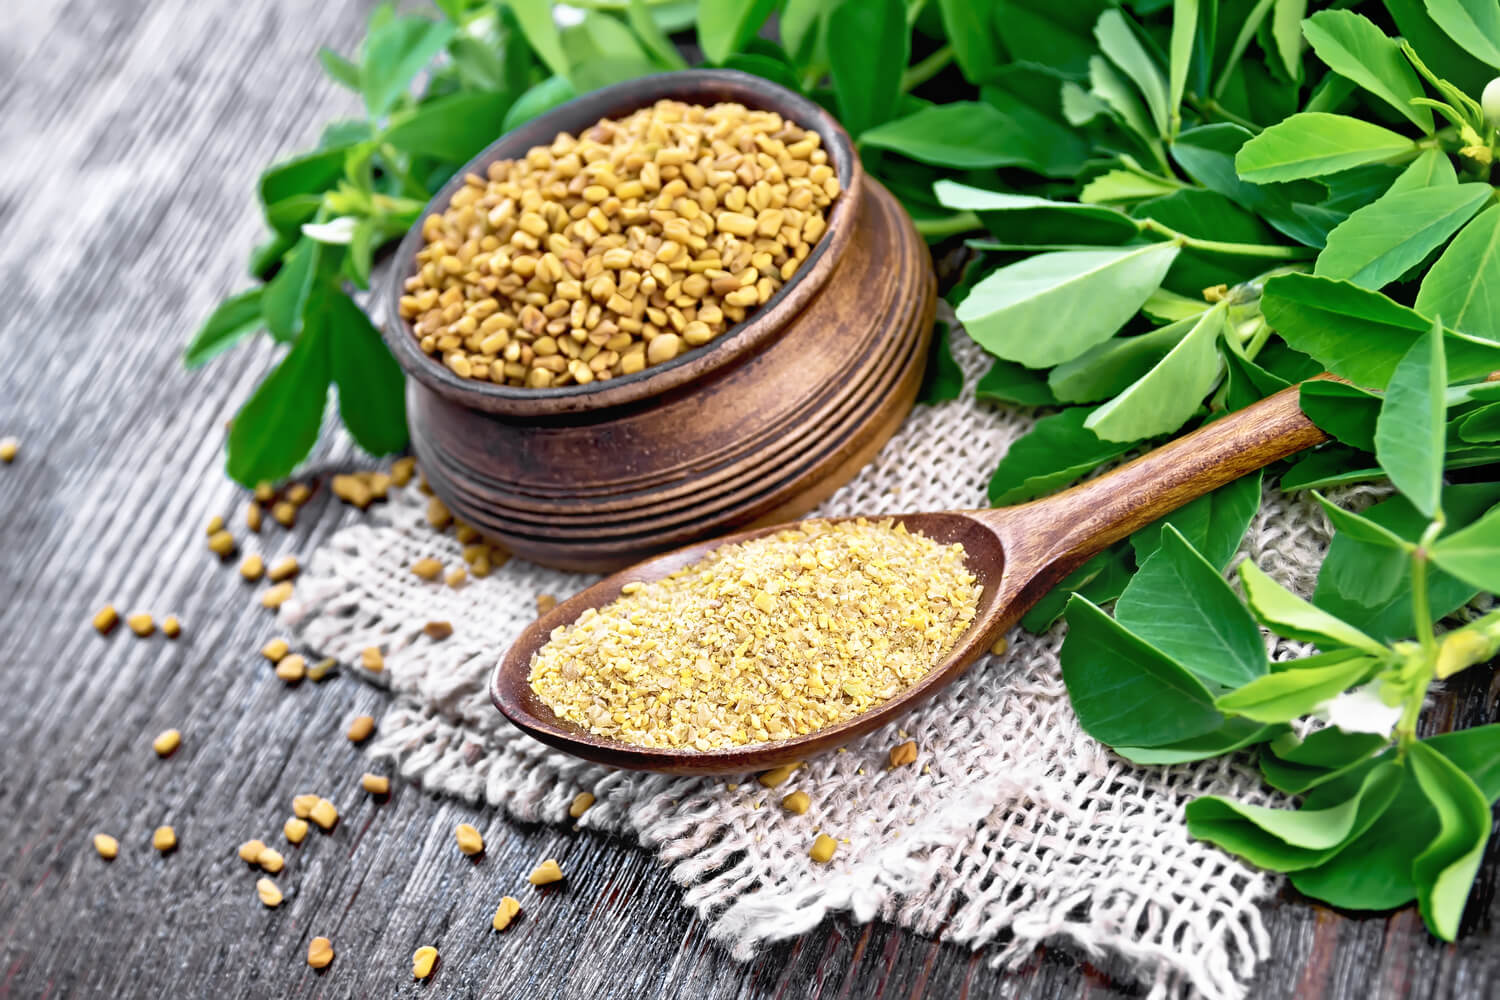 Ways To Use Fenugreek To Increase Breast Milk Production